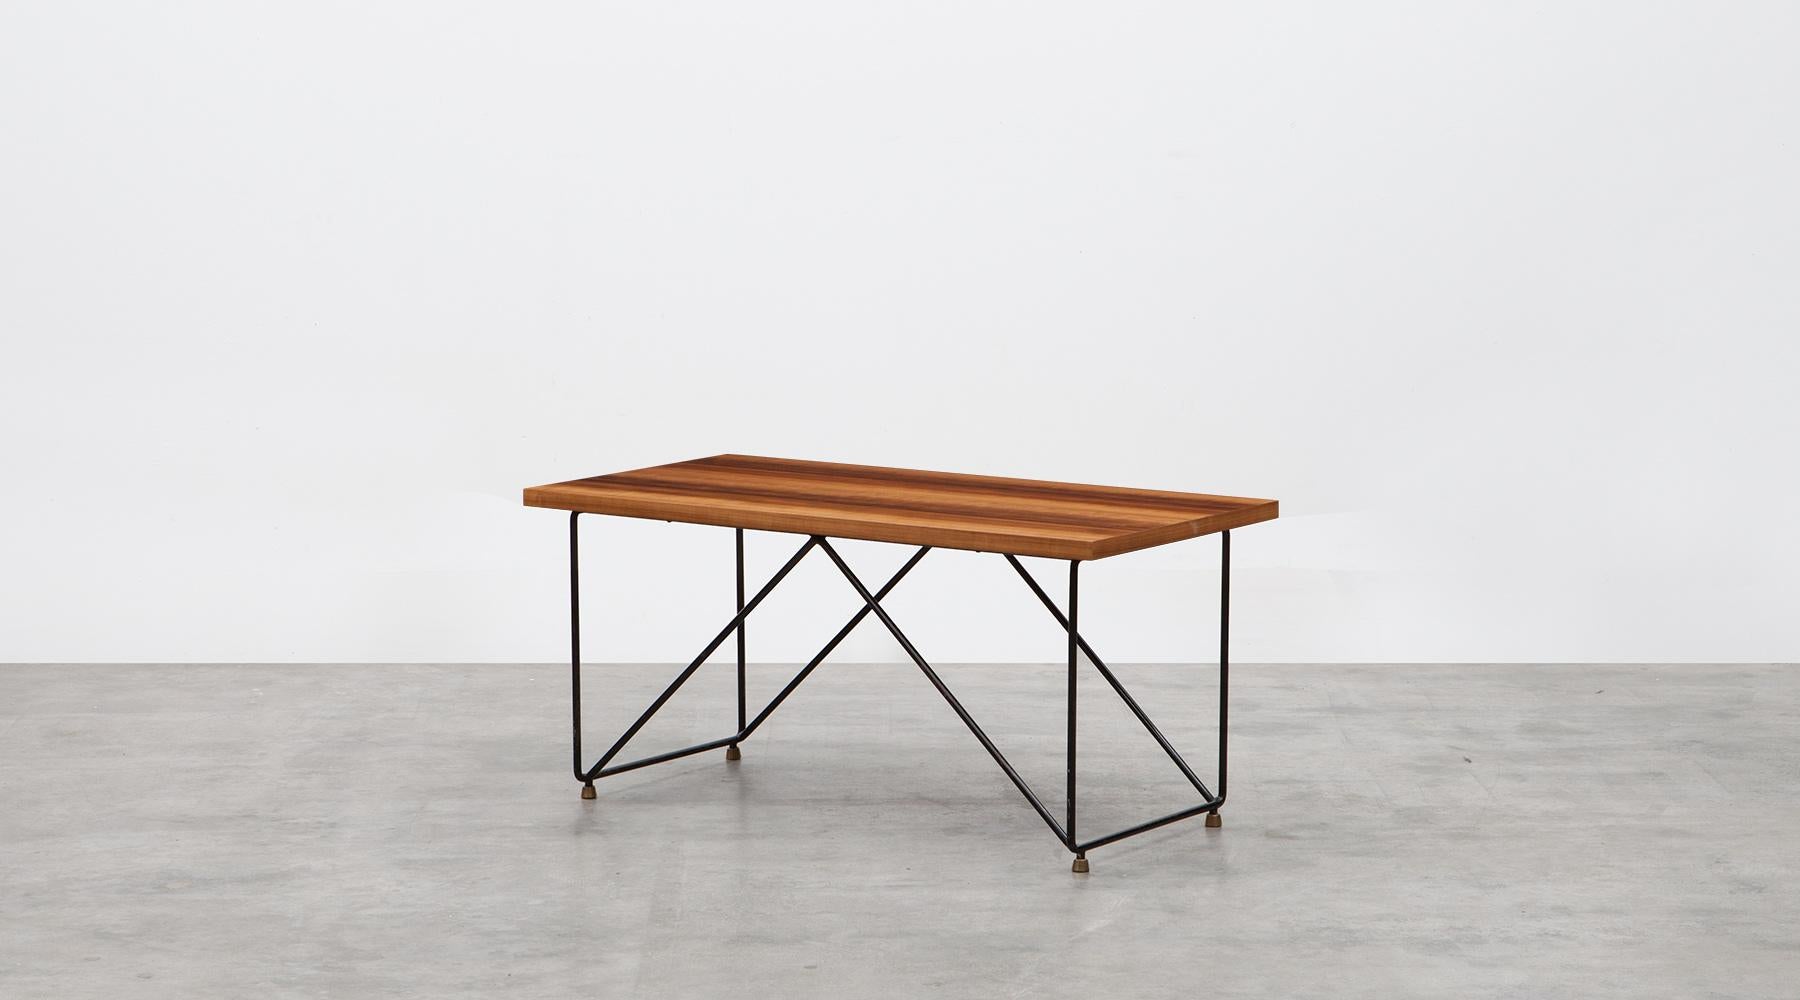 Veneer table top, metal frame, coffee table by Rinaldi Gastone, Italy, 1950.

Slim and delightful coffee table by Italian Gastone Rinaldi comes with a veneer table top, with a beautifully patterned structure, standing on four, geometrically